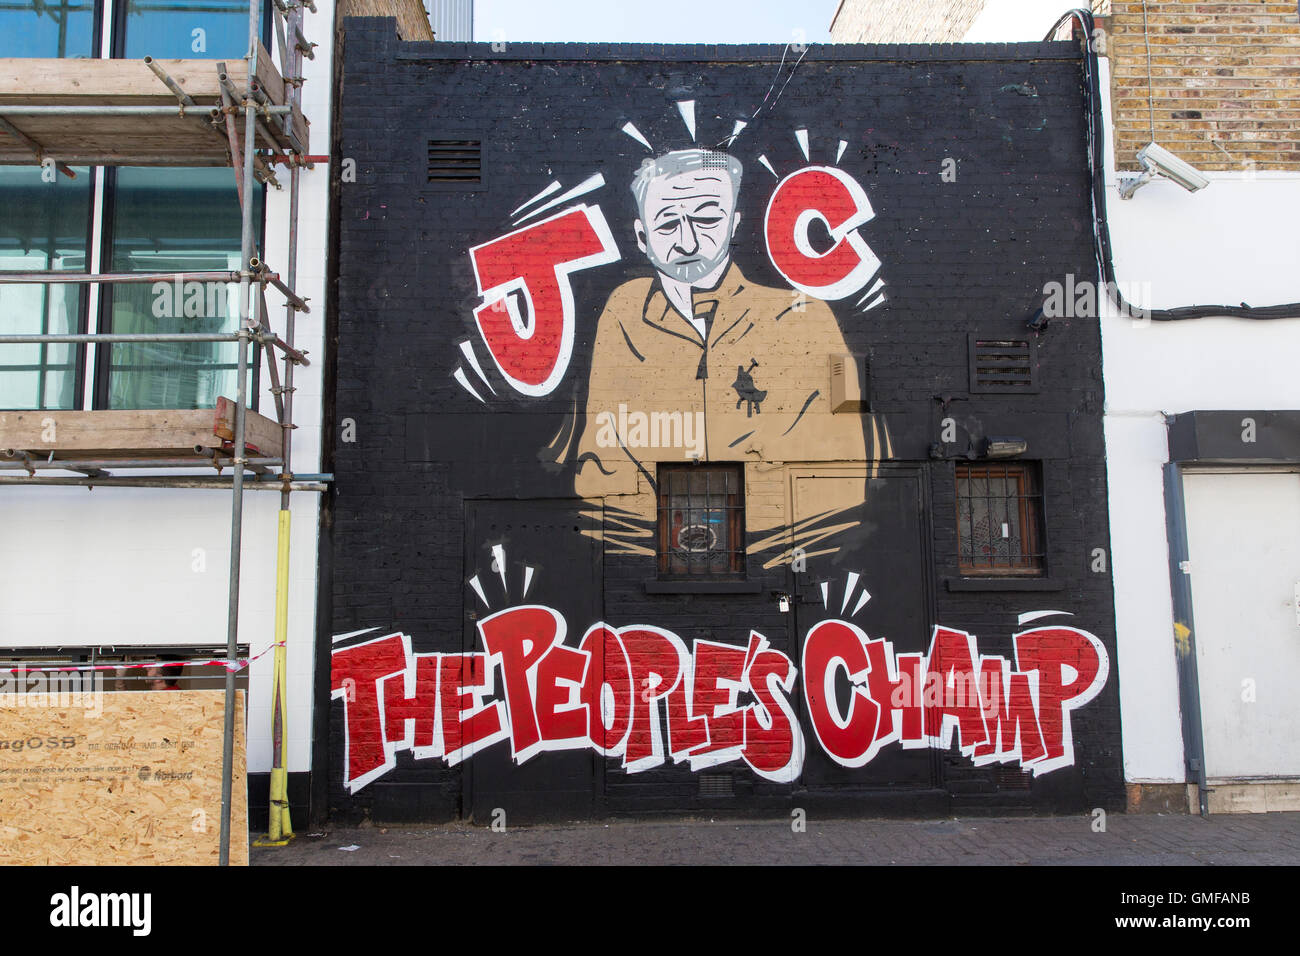 London, UK. 26th Aug, 2016. A man walks by a wall painted in support of Labour Party leader Jeremy Corbyn in the London borough of Camden. Corbyn is battling Owen Smith for leadership of the Labour Party which is to be decided on September 24, 2016. Credit:  Joel Ford/Alamy Live News Stock Photo